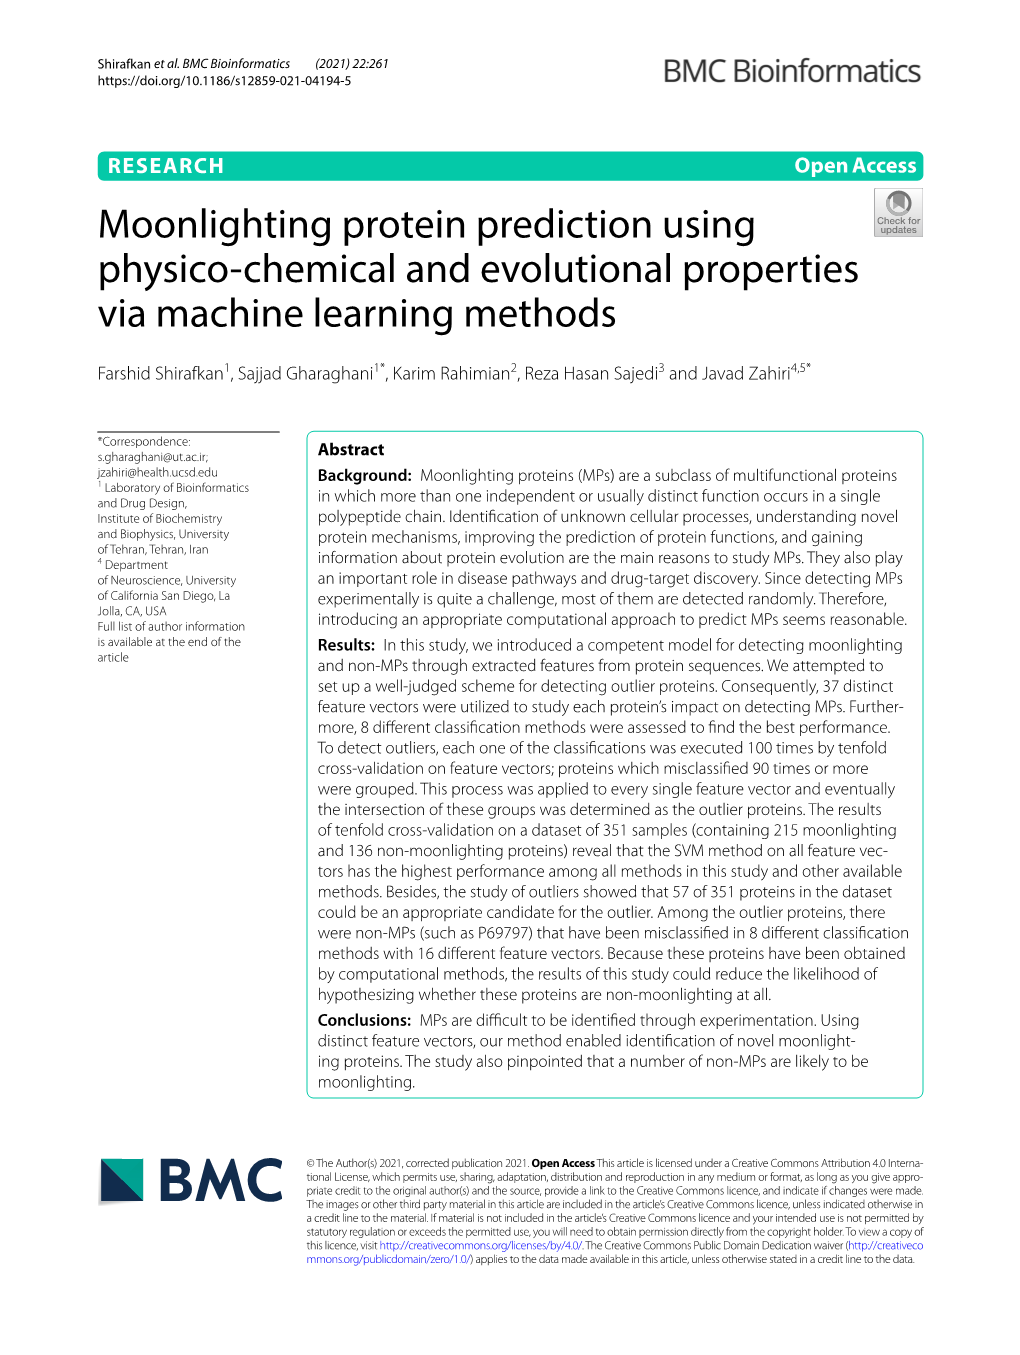 Moonlighting Protein Prediction Using Physico-Chemical and Evolutional